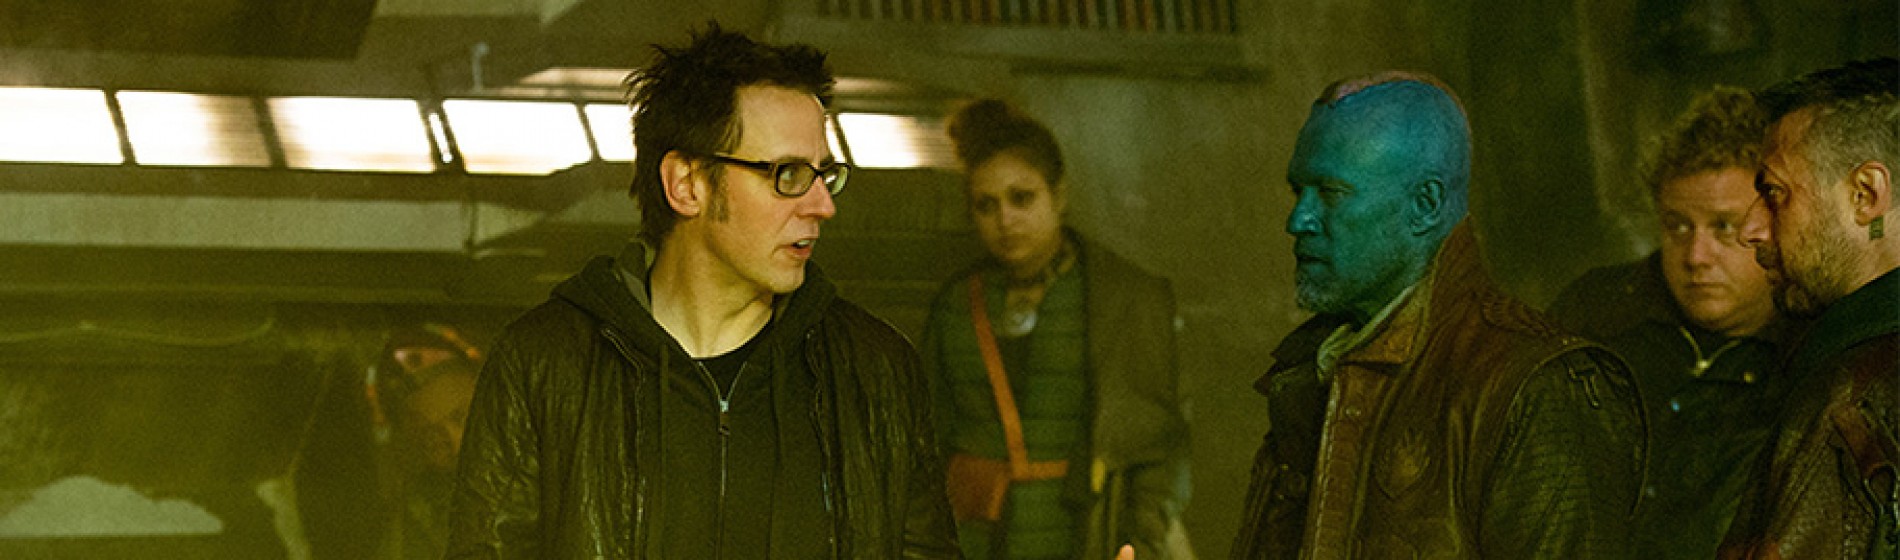 James Gunn Guardians of the Galaxy Fired Rehired